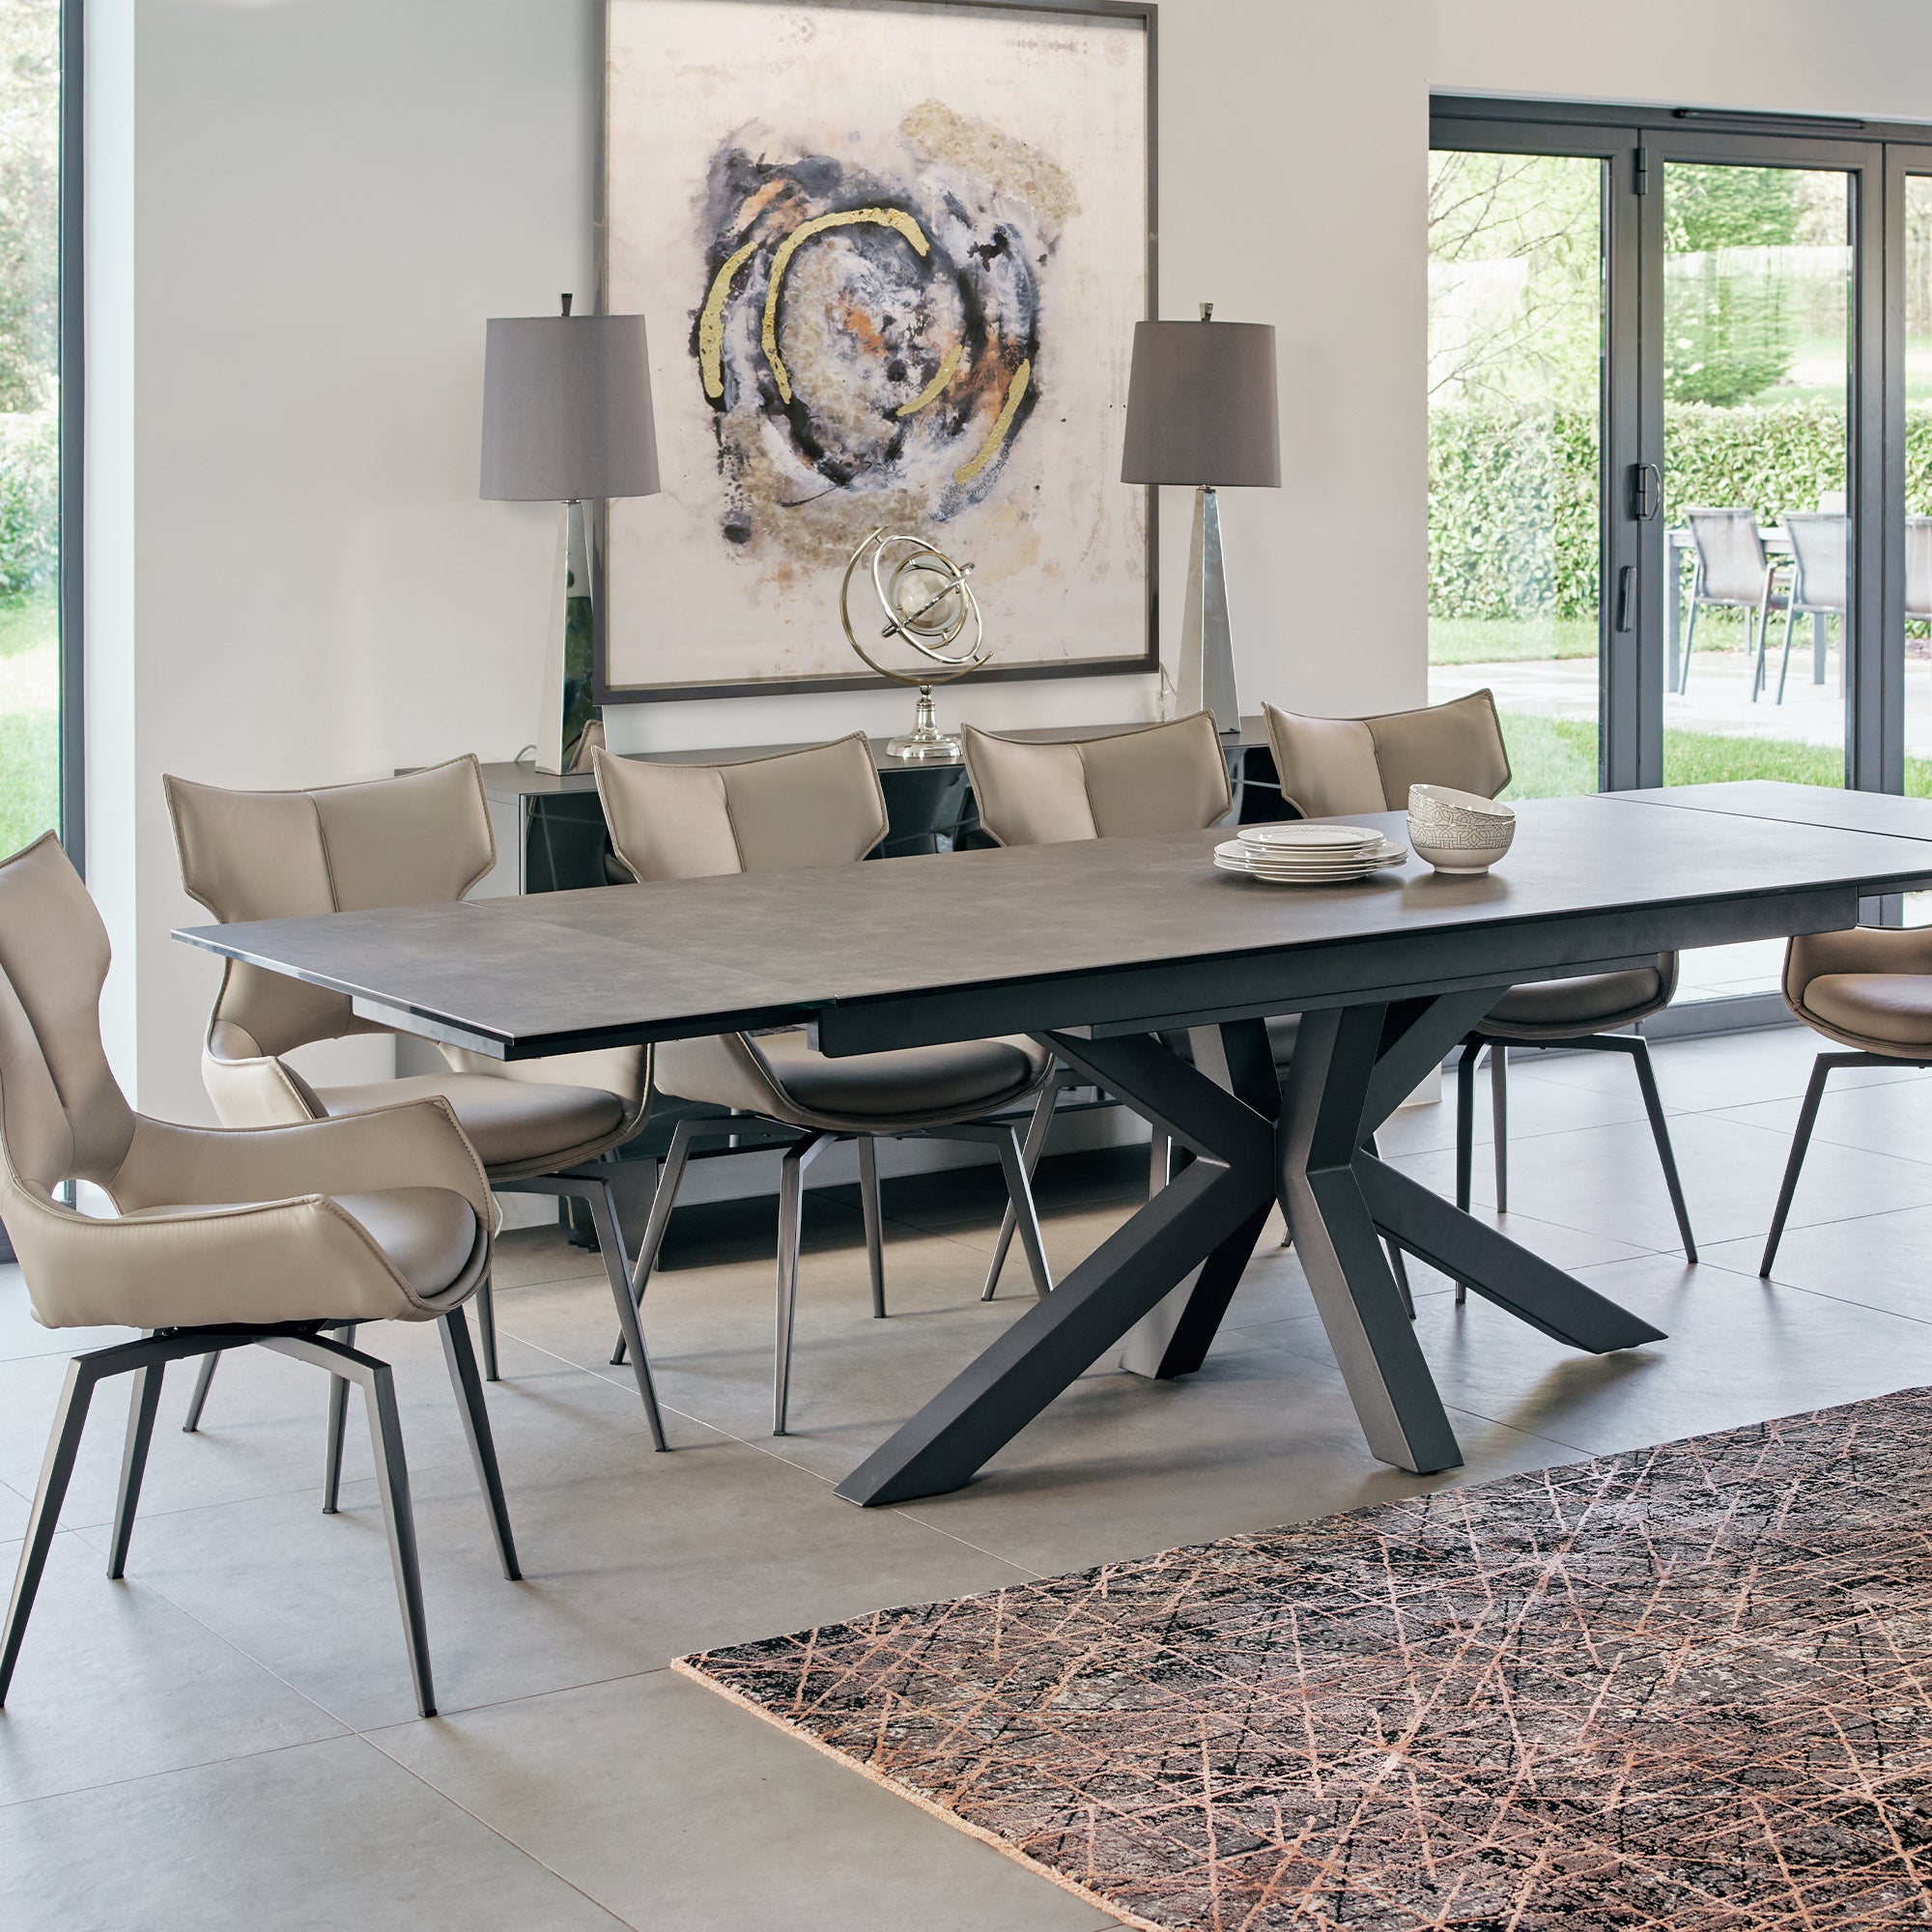 200cm Ext Dining Table KL54 Taupe Brown Ceramic Top